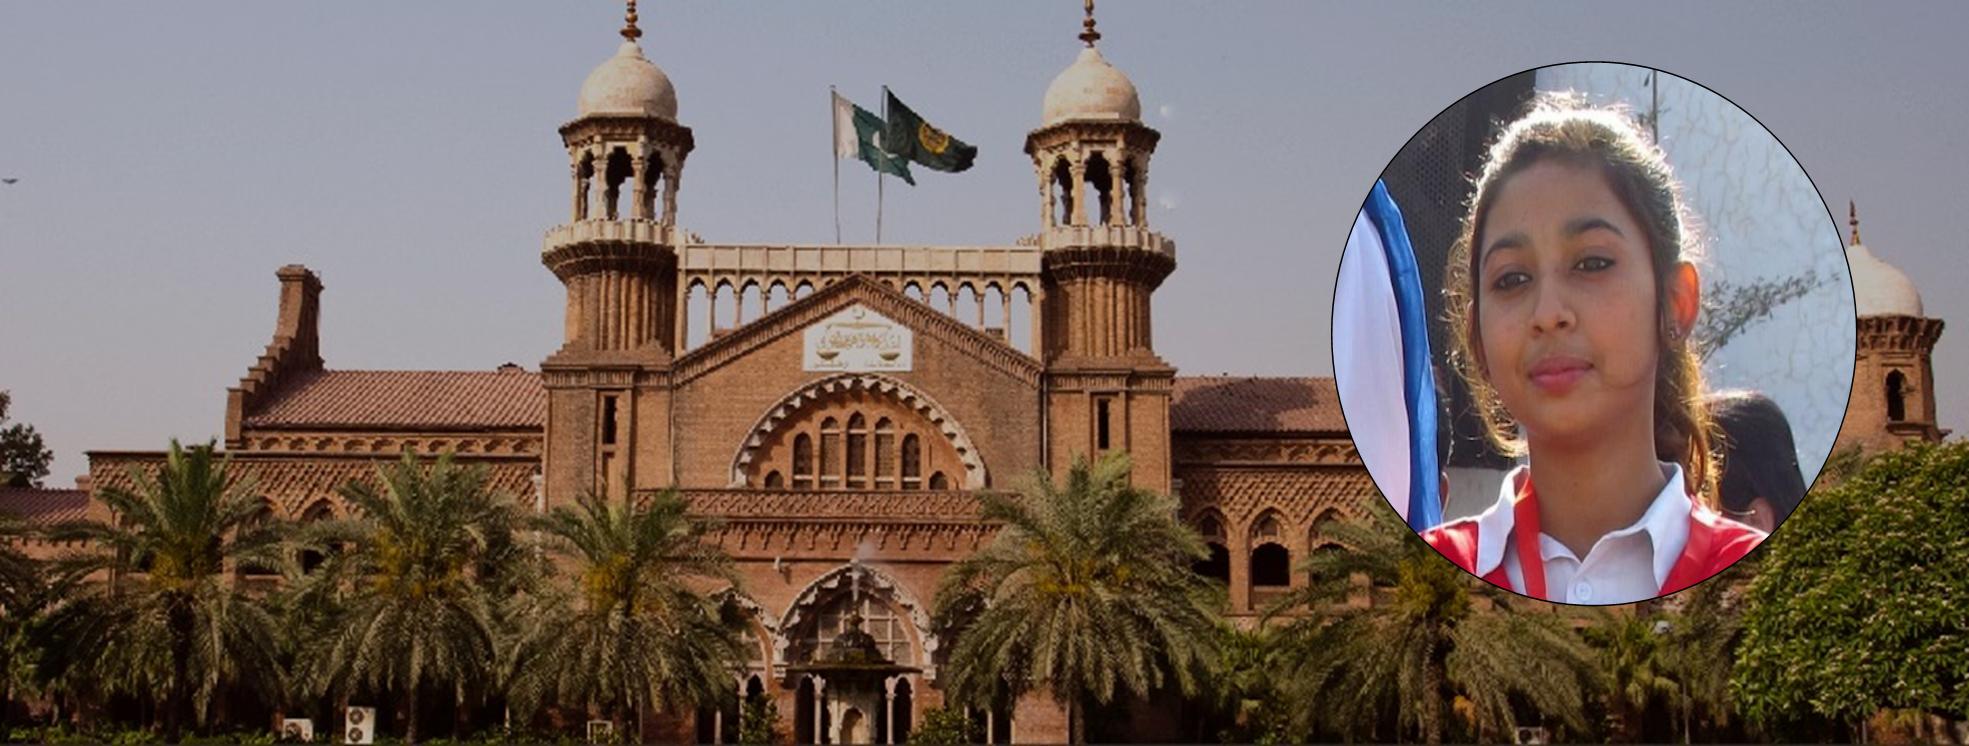 Pakistan’s High Court Allows Abduction and Forced Marriage of Christian Girl to Muslim Kidnapper